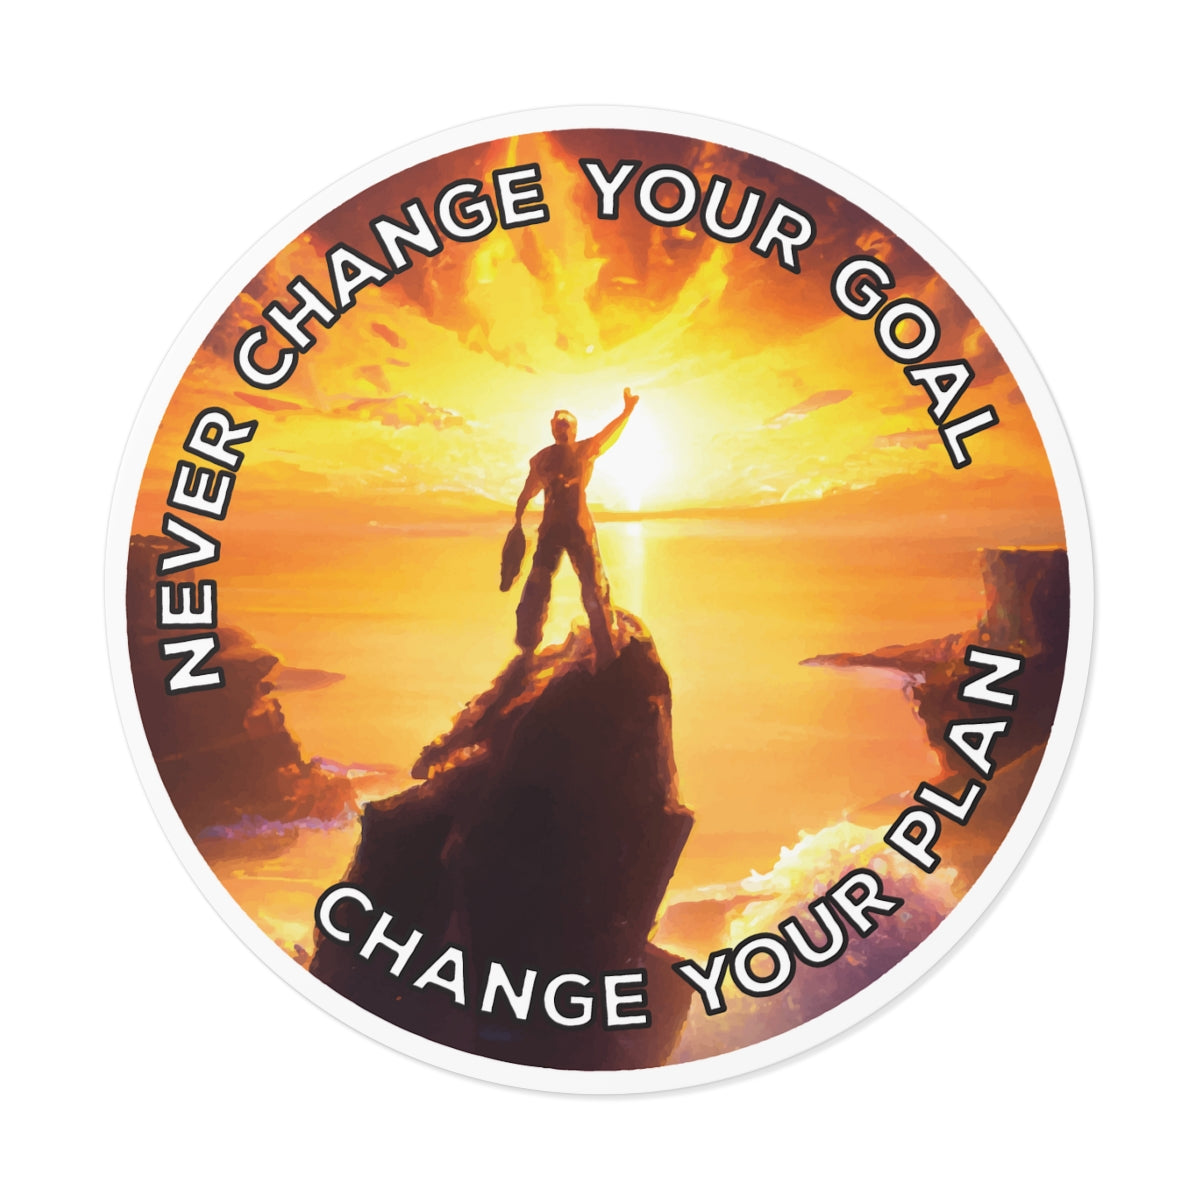 Never change your goal - Round Vinyl Sticker #size_4x4-inches